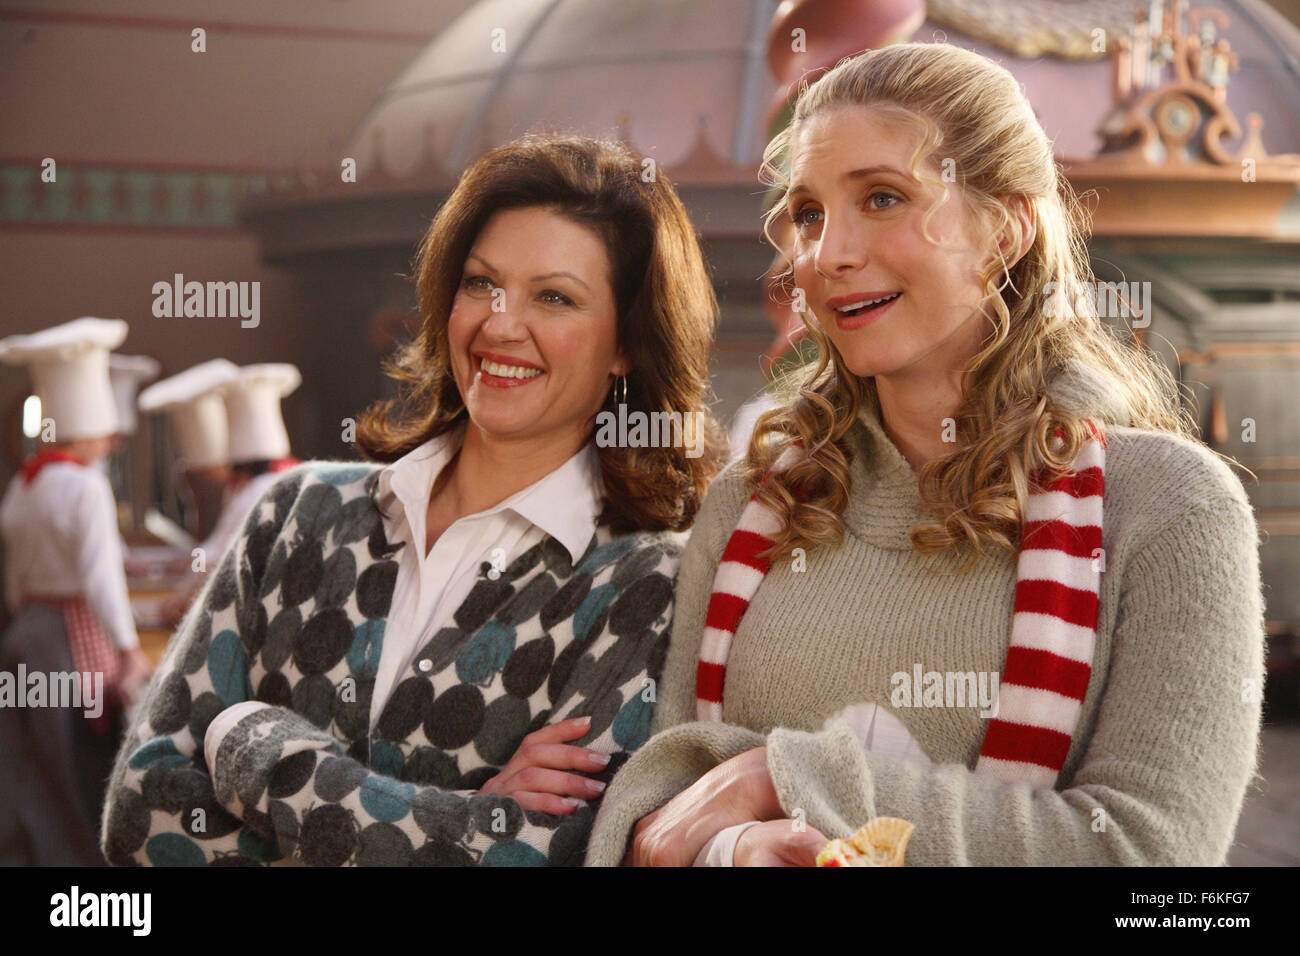 RELEASE DATE: November 3, 2006. MOVIE TITLE: Santa Clause 3: The Escape Clause. STUDIO: Walt Disney Pictures. PLOT: Santa (Allen), aka Scott Calvin, is faced with double-duty: how to keep his new family happy, and how to stop Jack Frost from taking over Christmas. PICTURED: WENDY CREWSON as Laura Miller and ELIZABETH MITCHELL as Mrs. Claus / Carol. Stock Photo